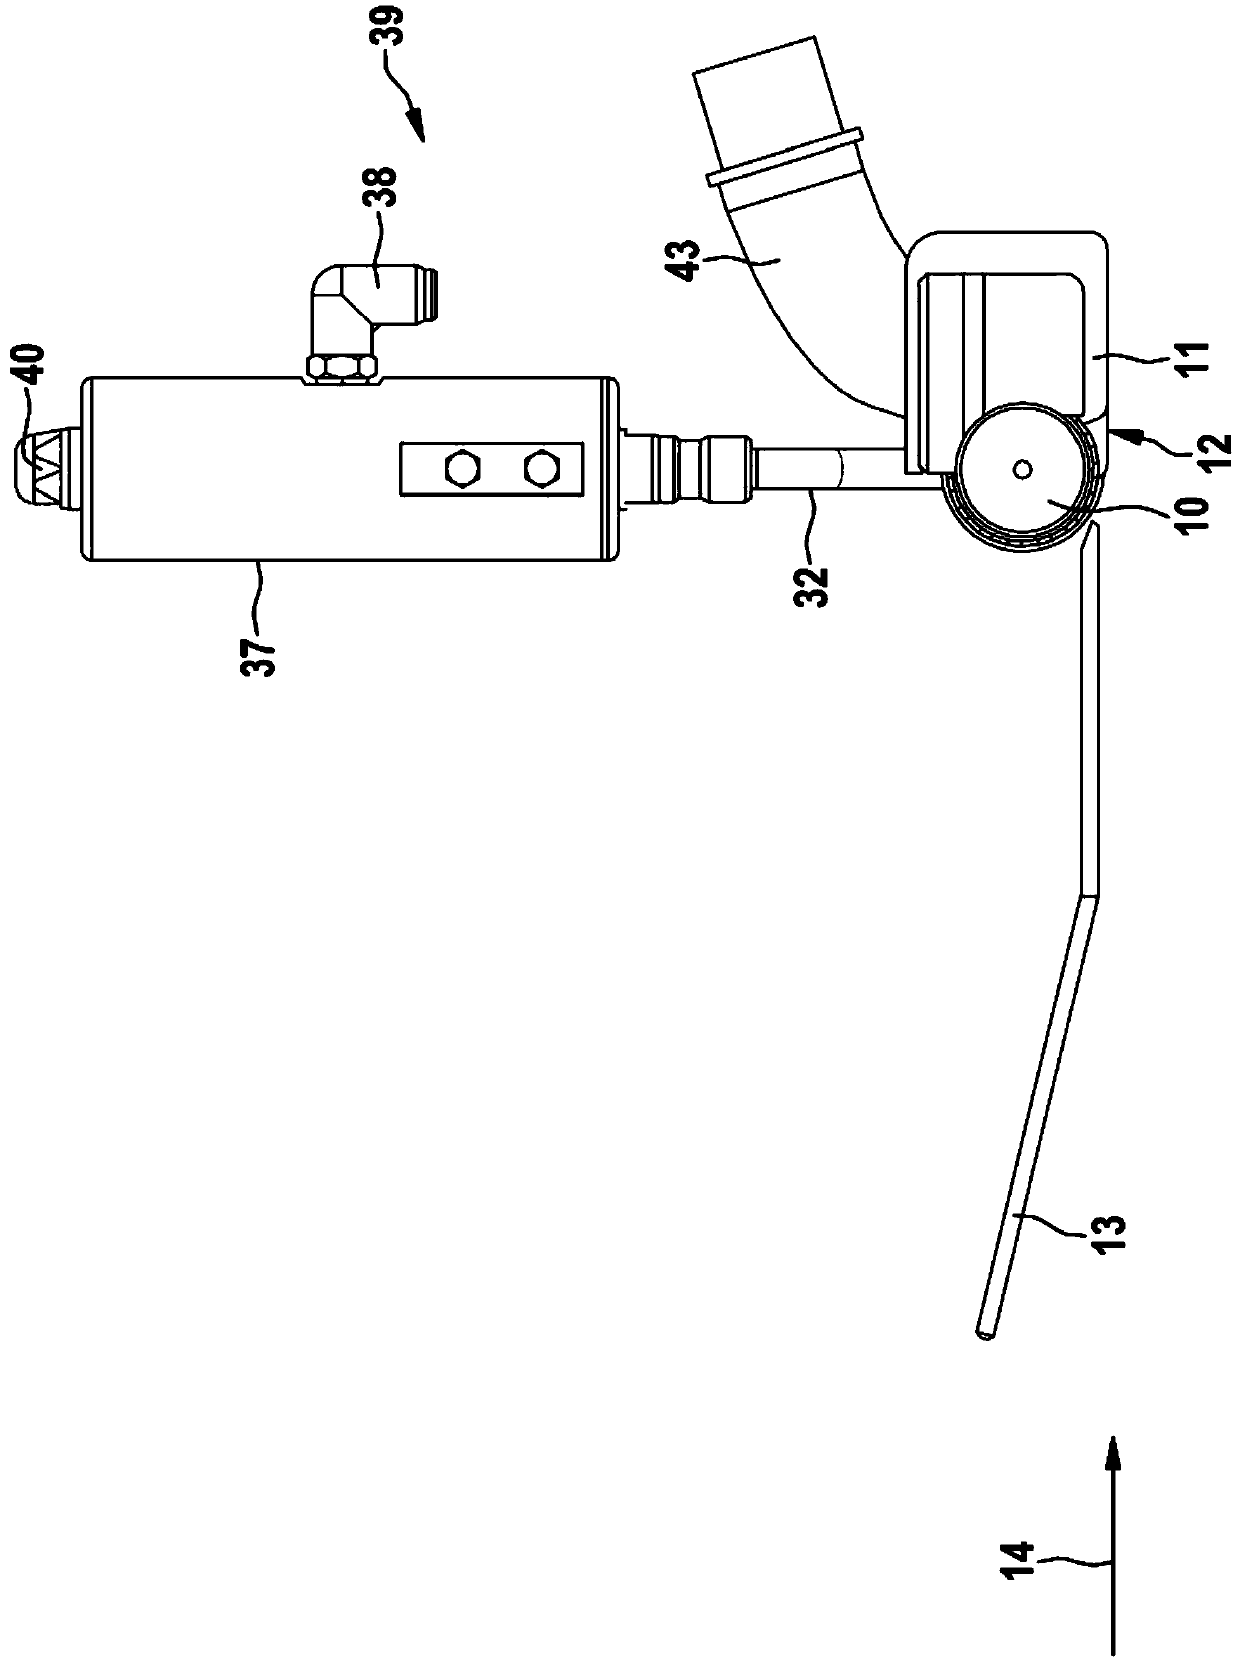 Device for removing pin bones from fish fillets